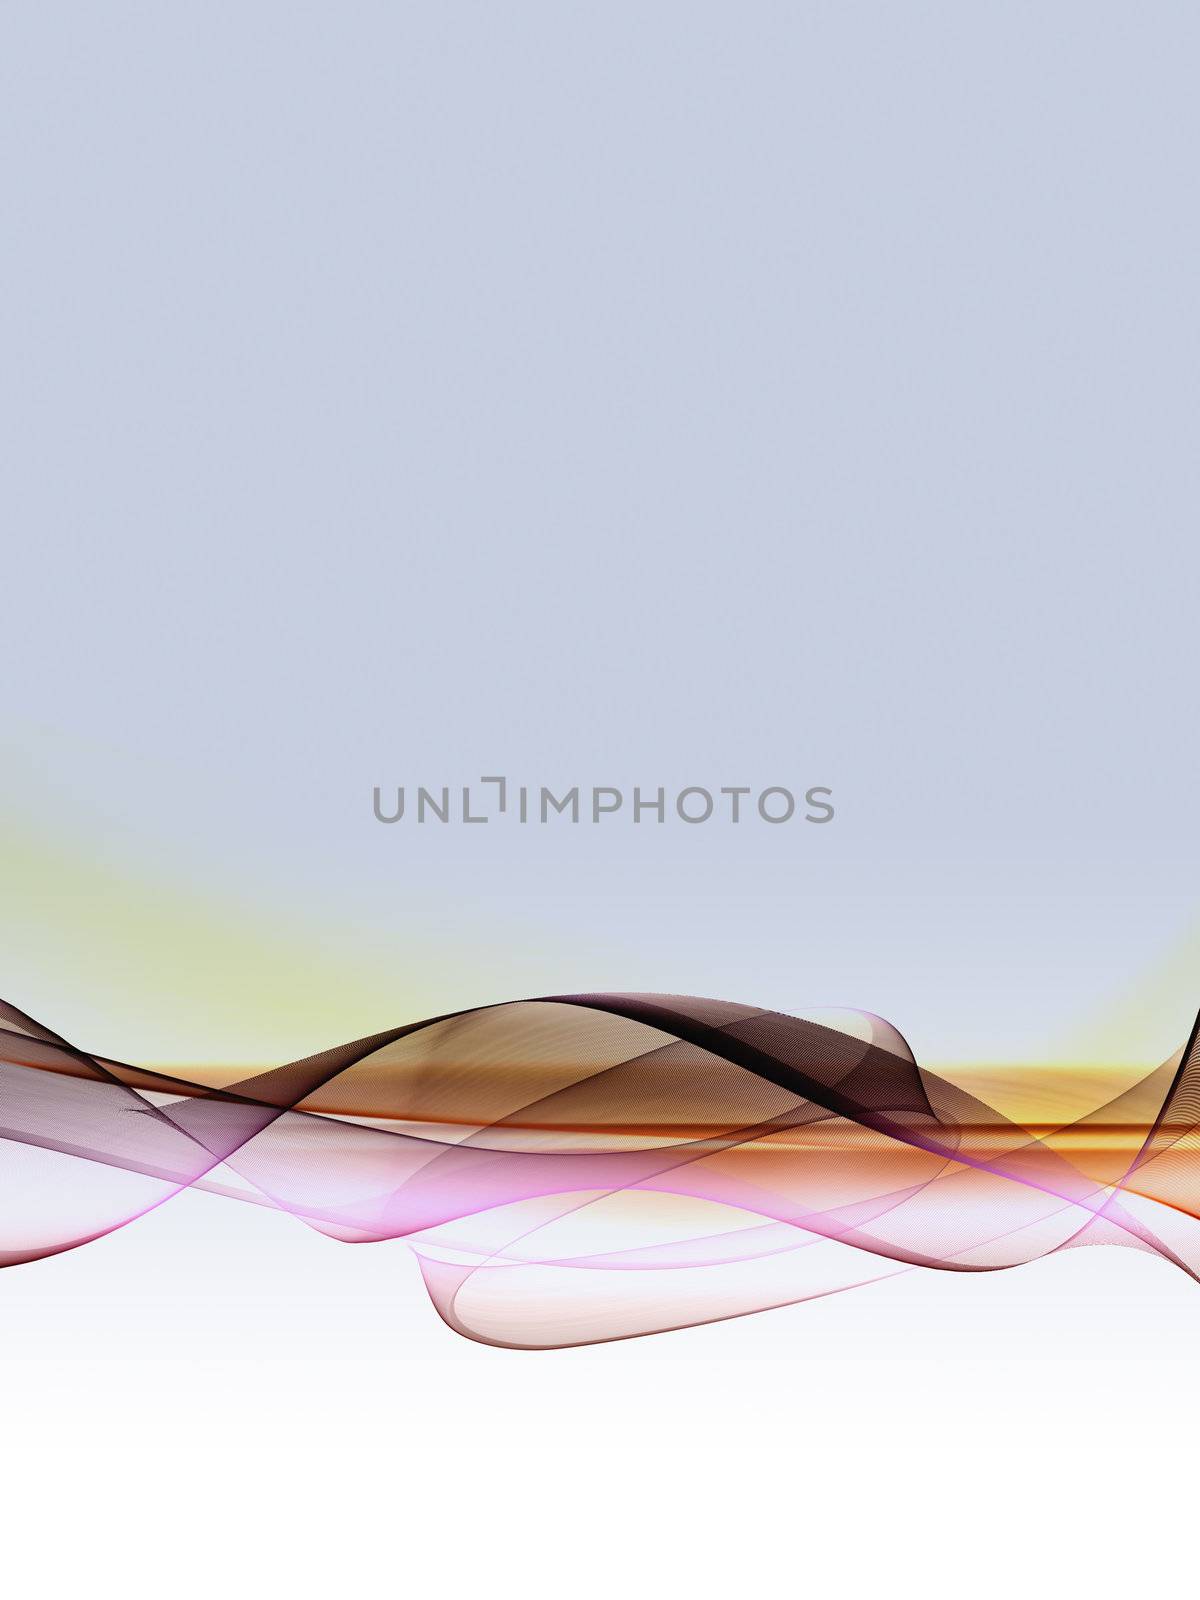 An abstract wallpaper on a gradient light blue/white background